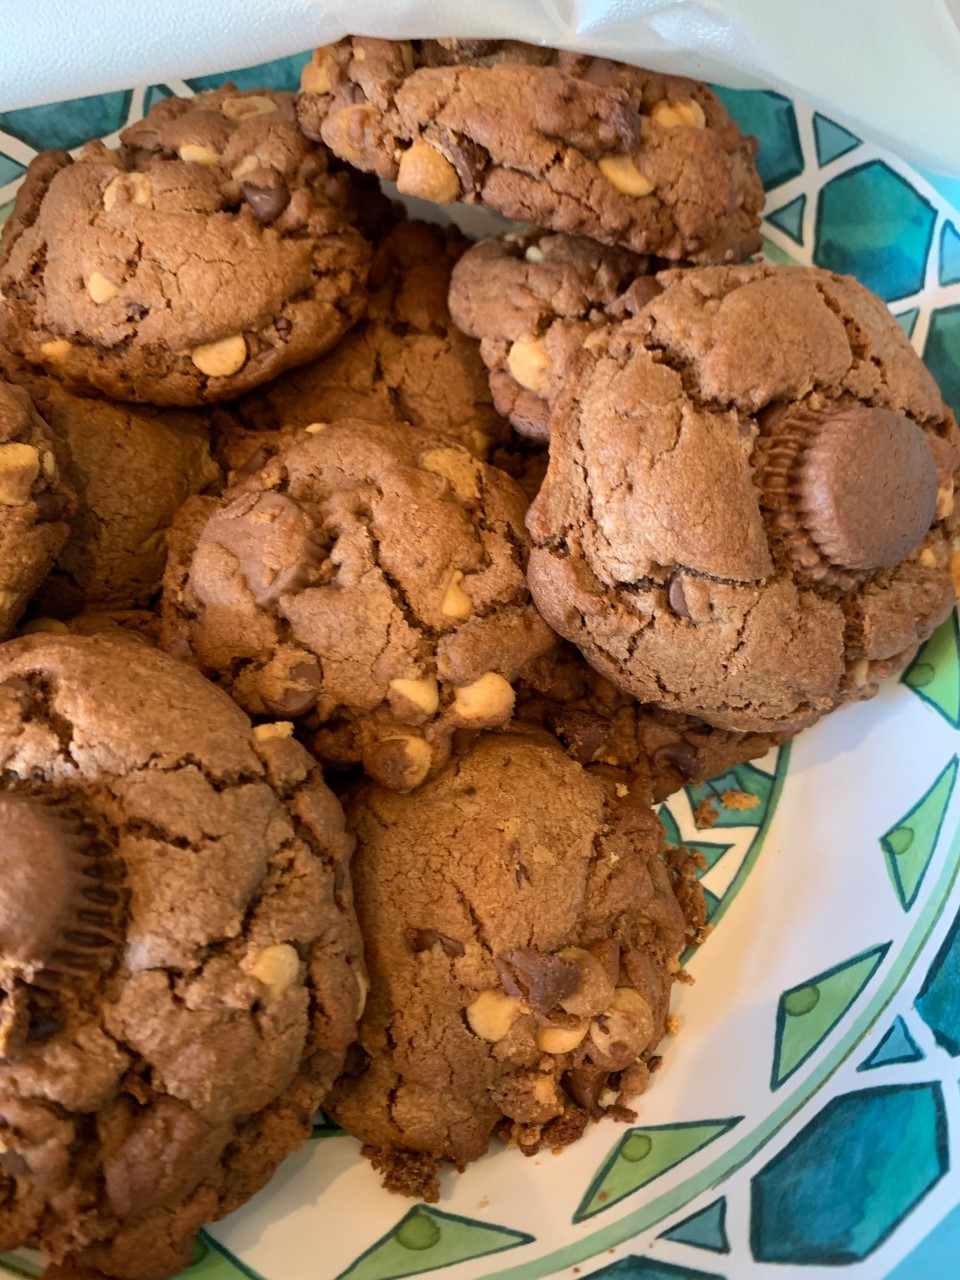 Mountainous Chocolate Peanut Butter Cup Cookies